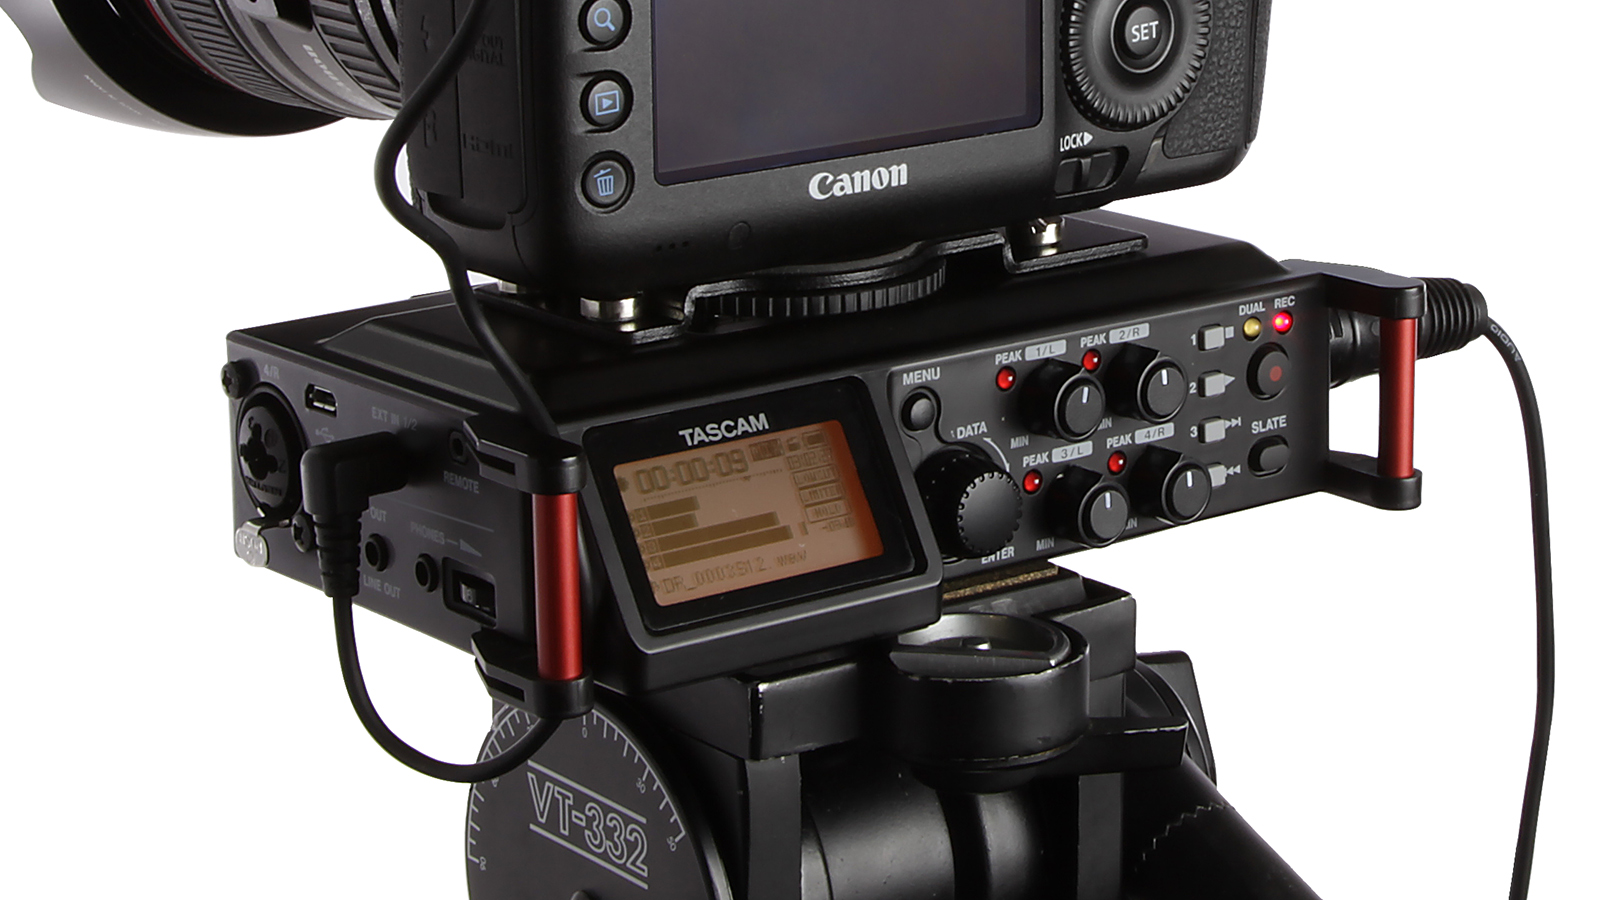 Compact, Rugged Design Can Be Attached Above or Below the Camera